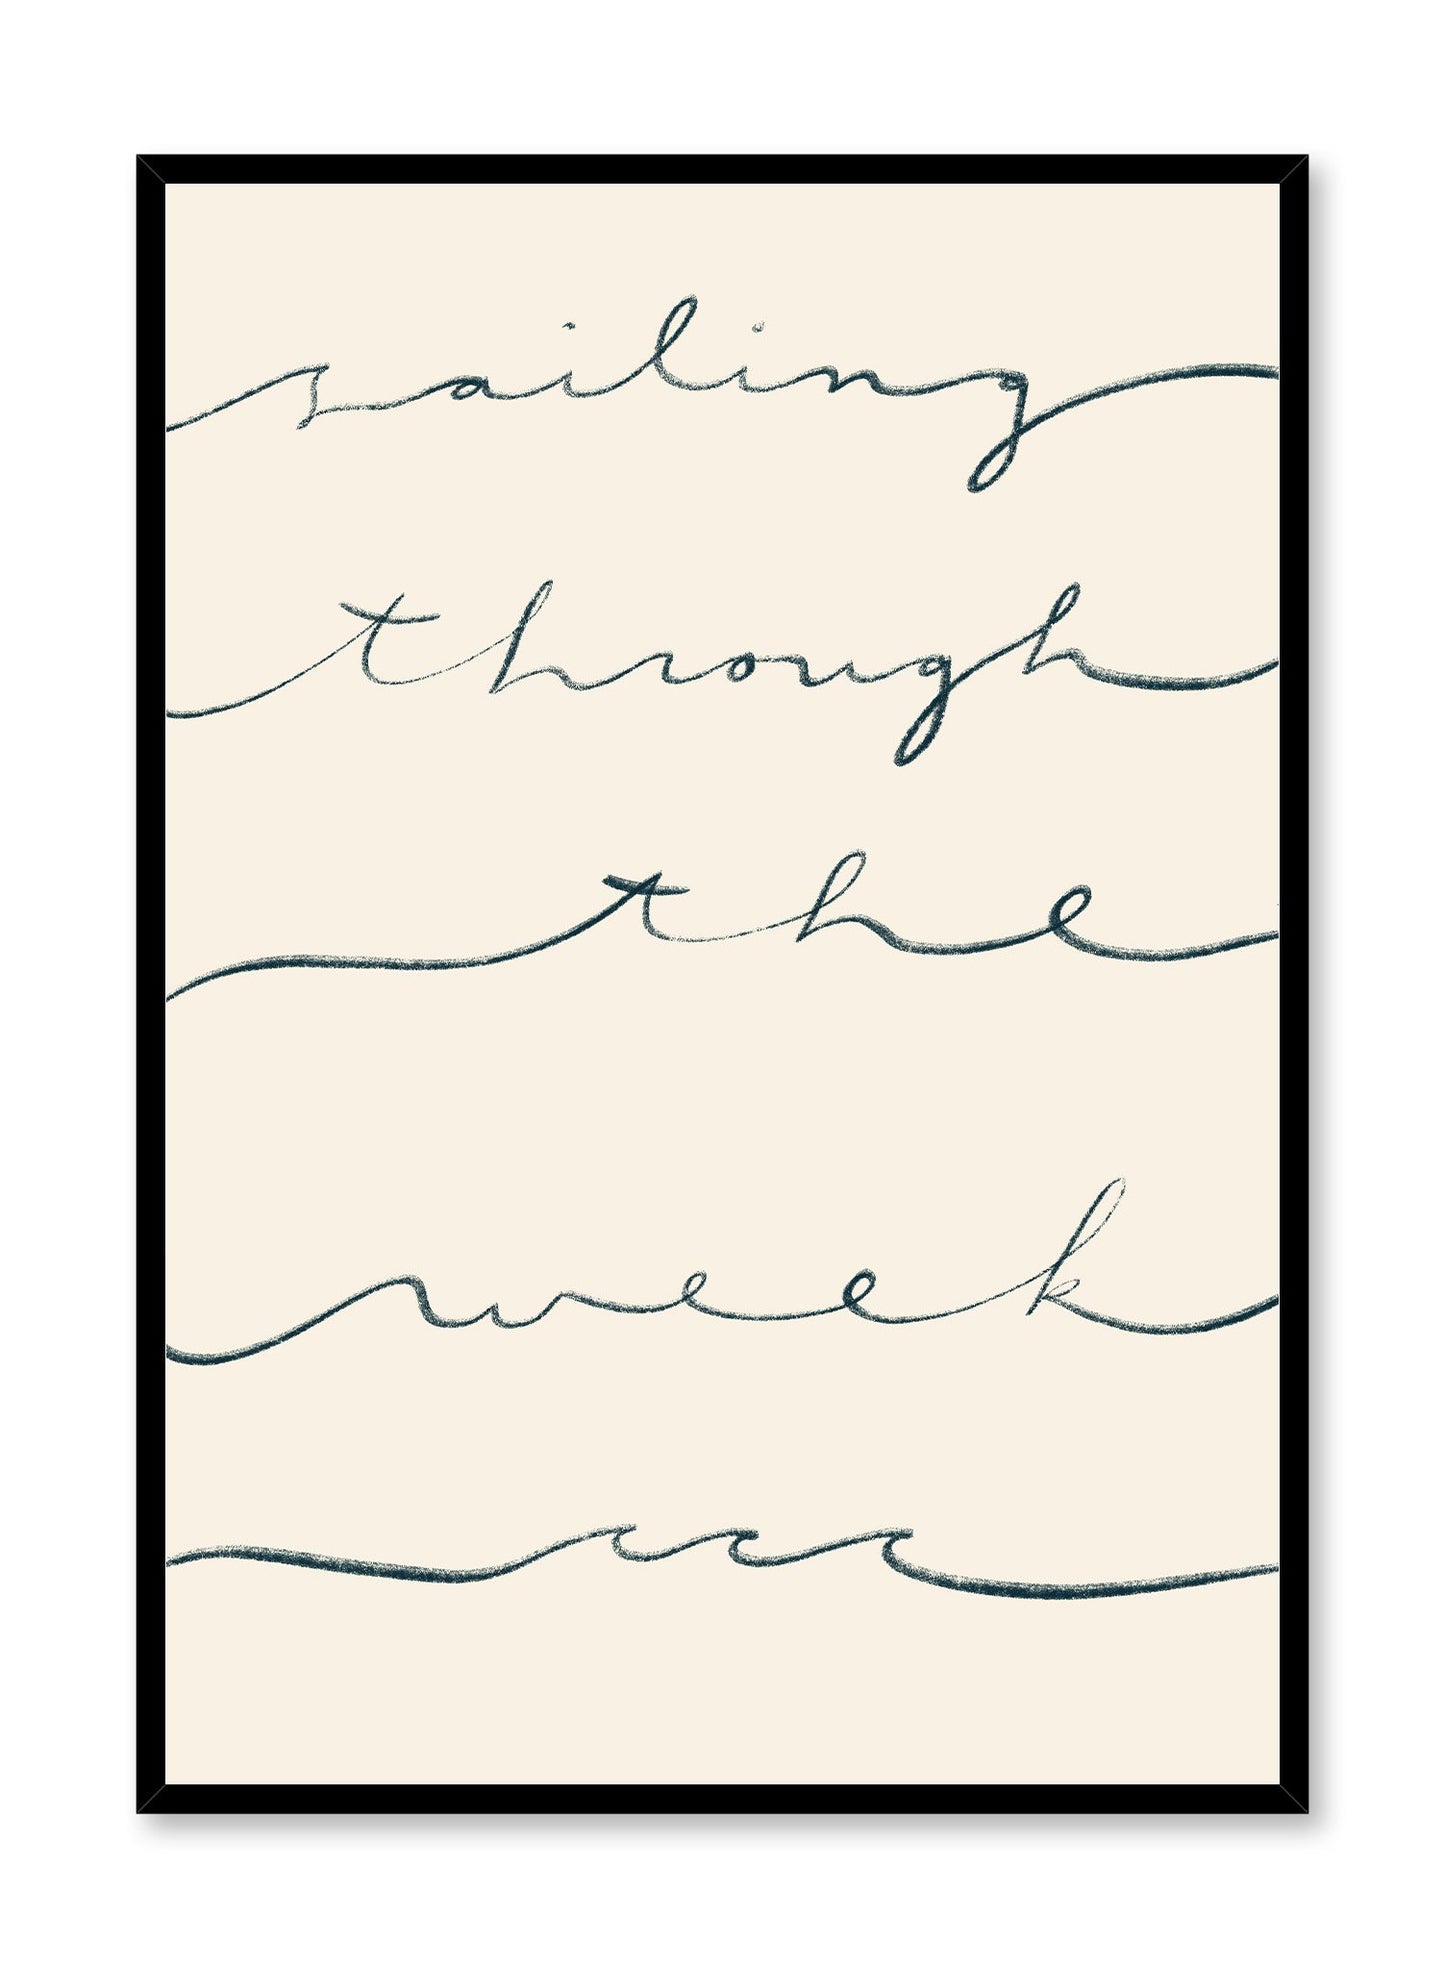 Smooth Sailing is a minimalist typography of the words 'sailing through the week' written cursively with a wave at the bottom by Opposite Wall.